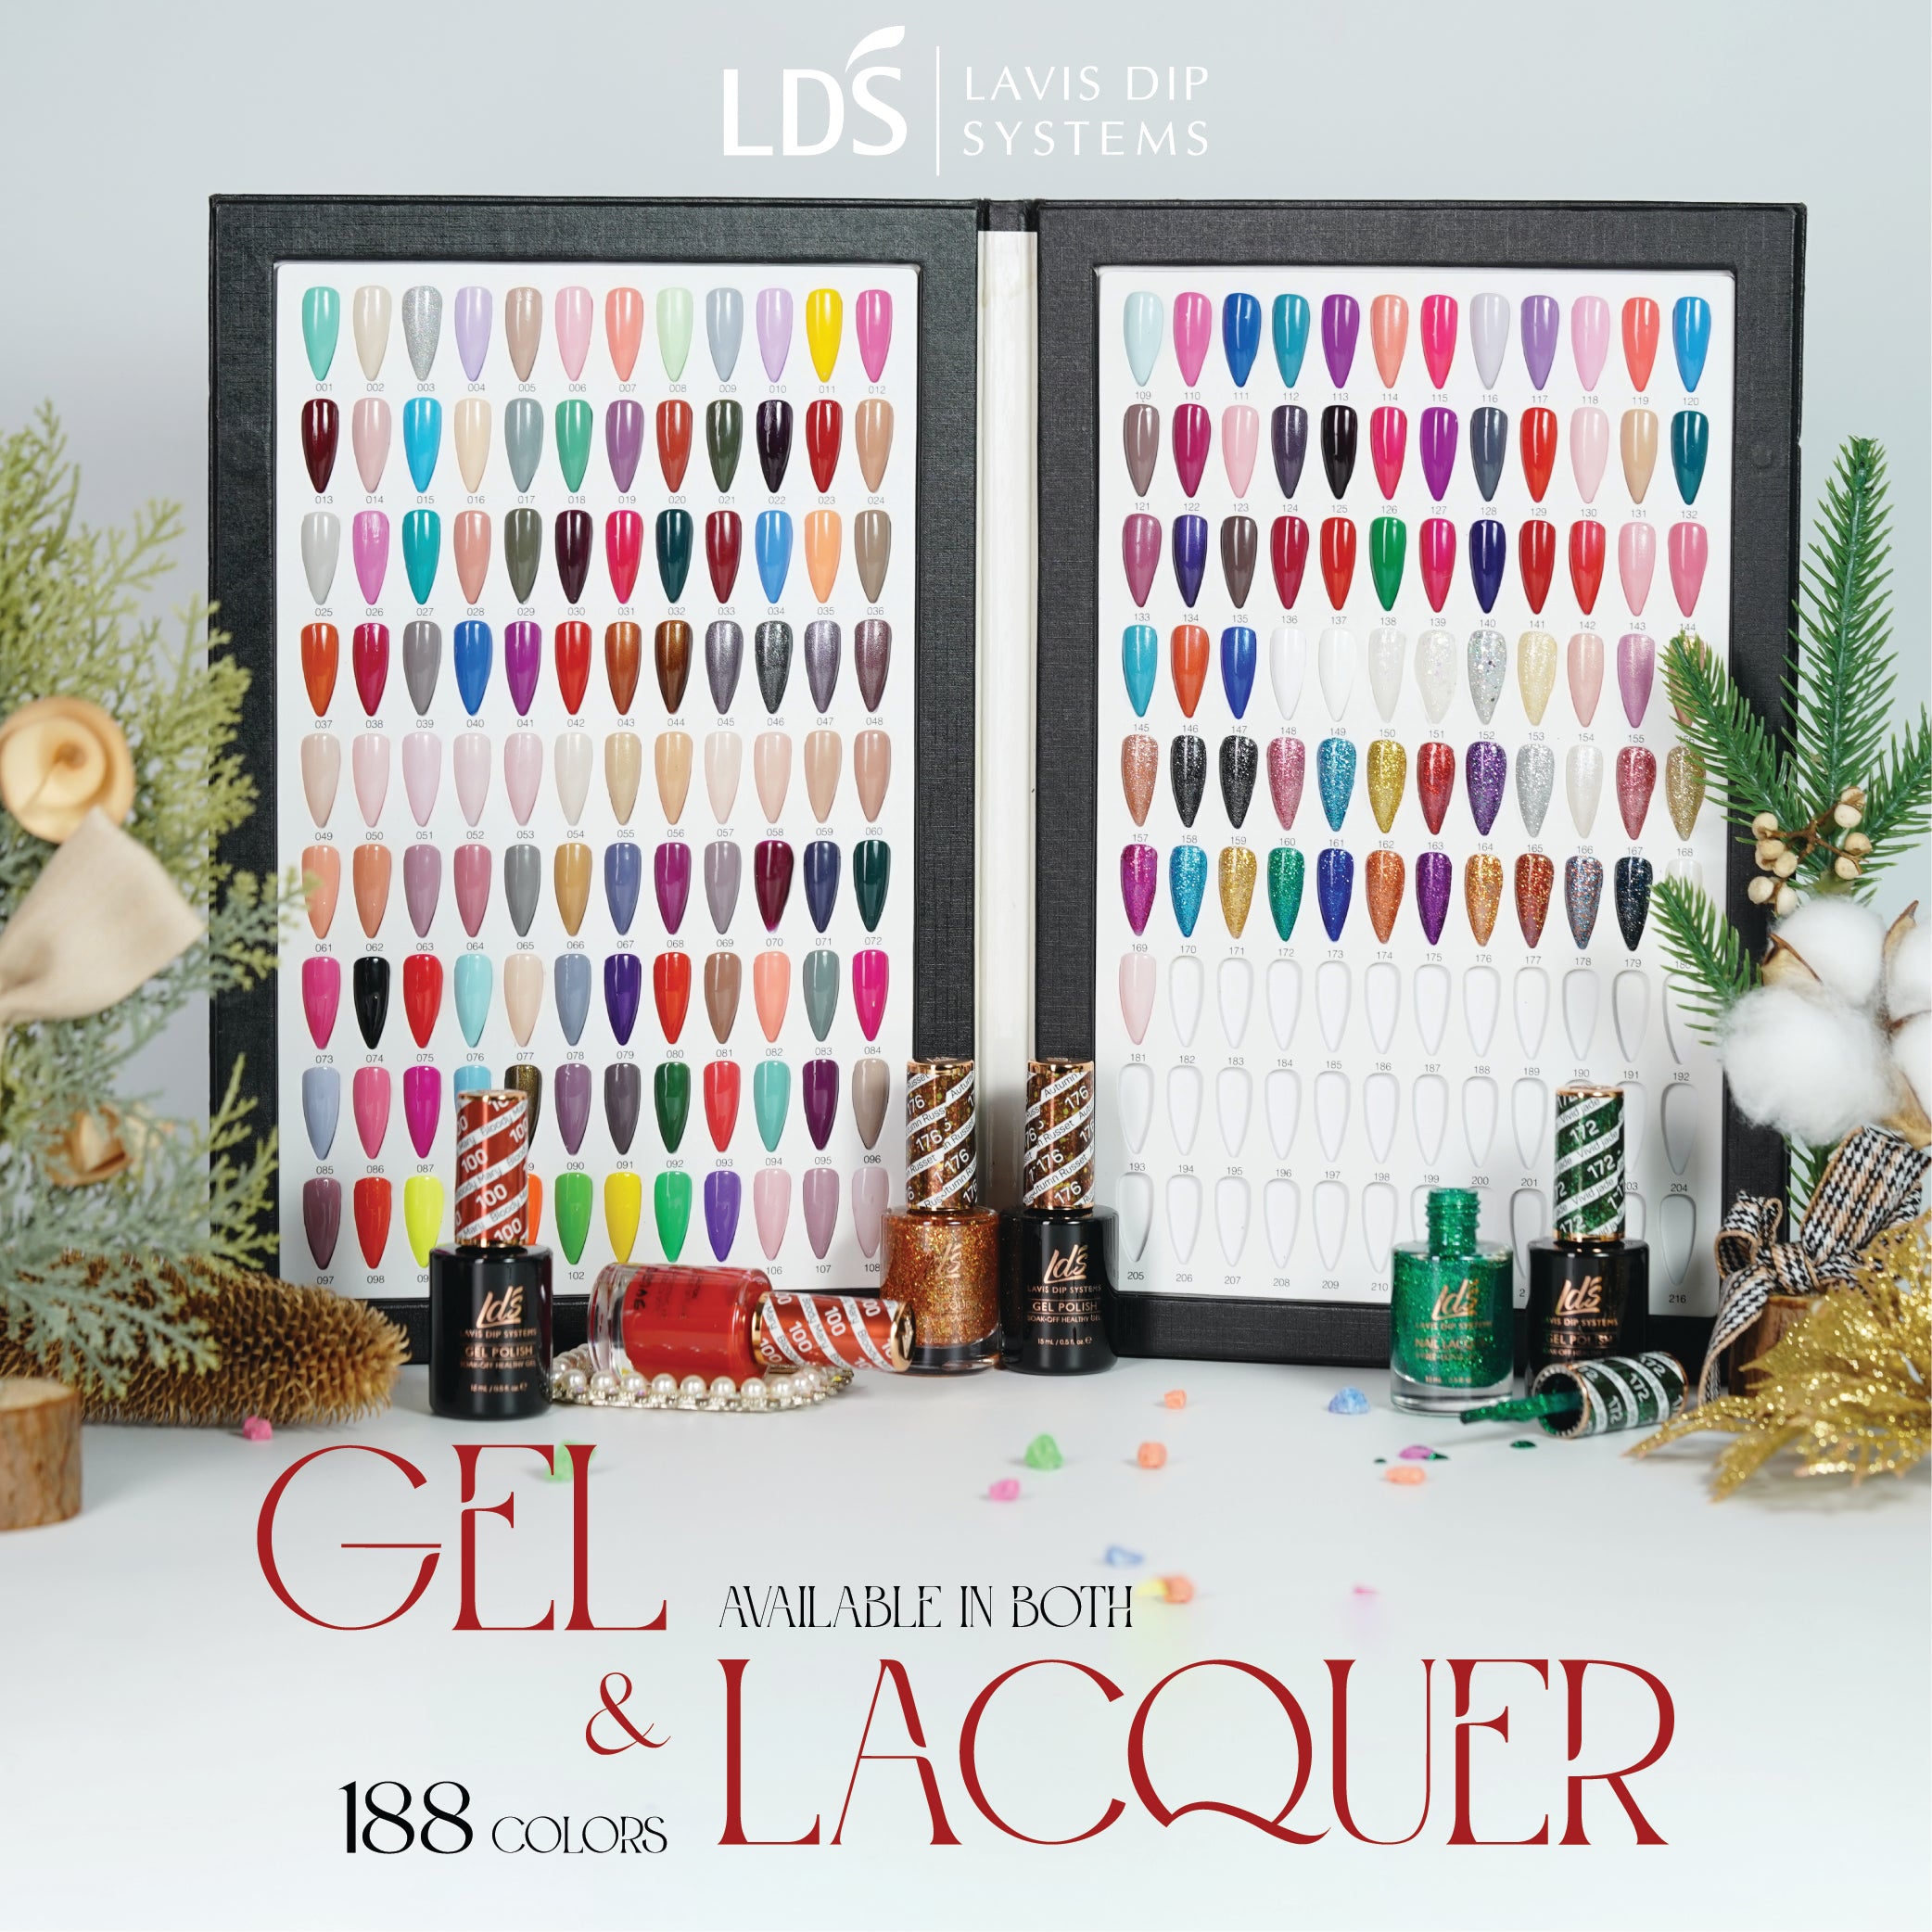 LDS 134 Secretly - LDS Healthy Gel Polish & Matching Nail Lacquer Duo Set - 0.5oz